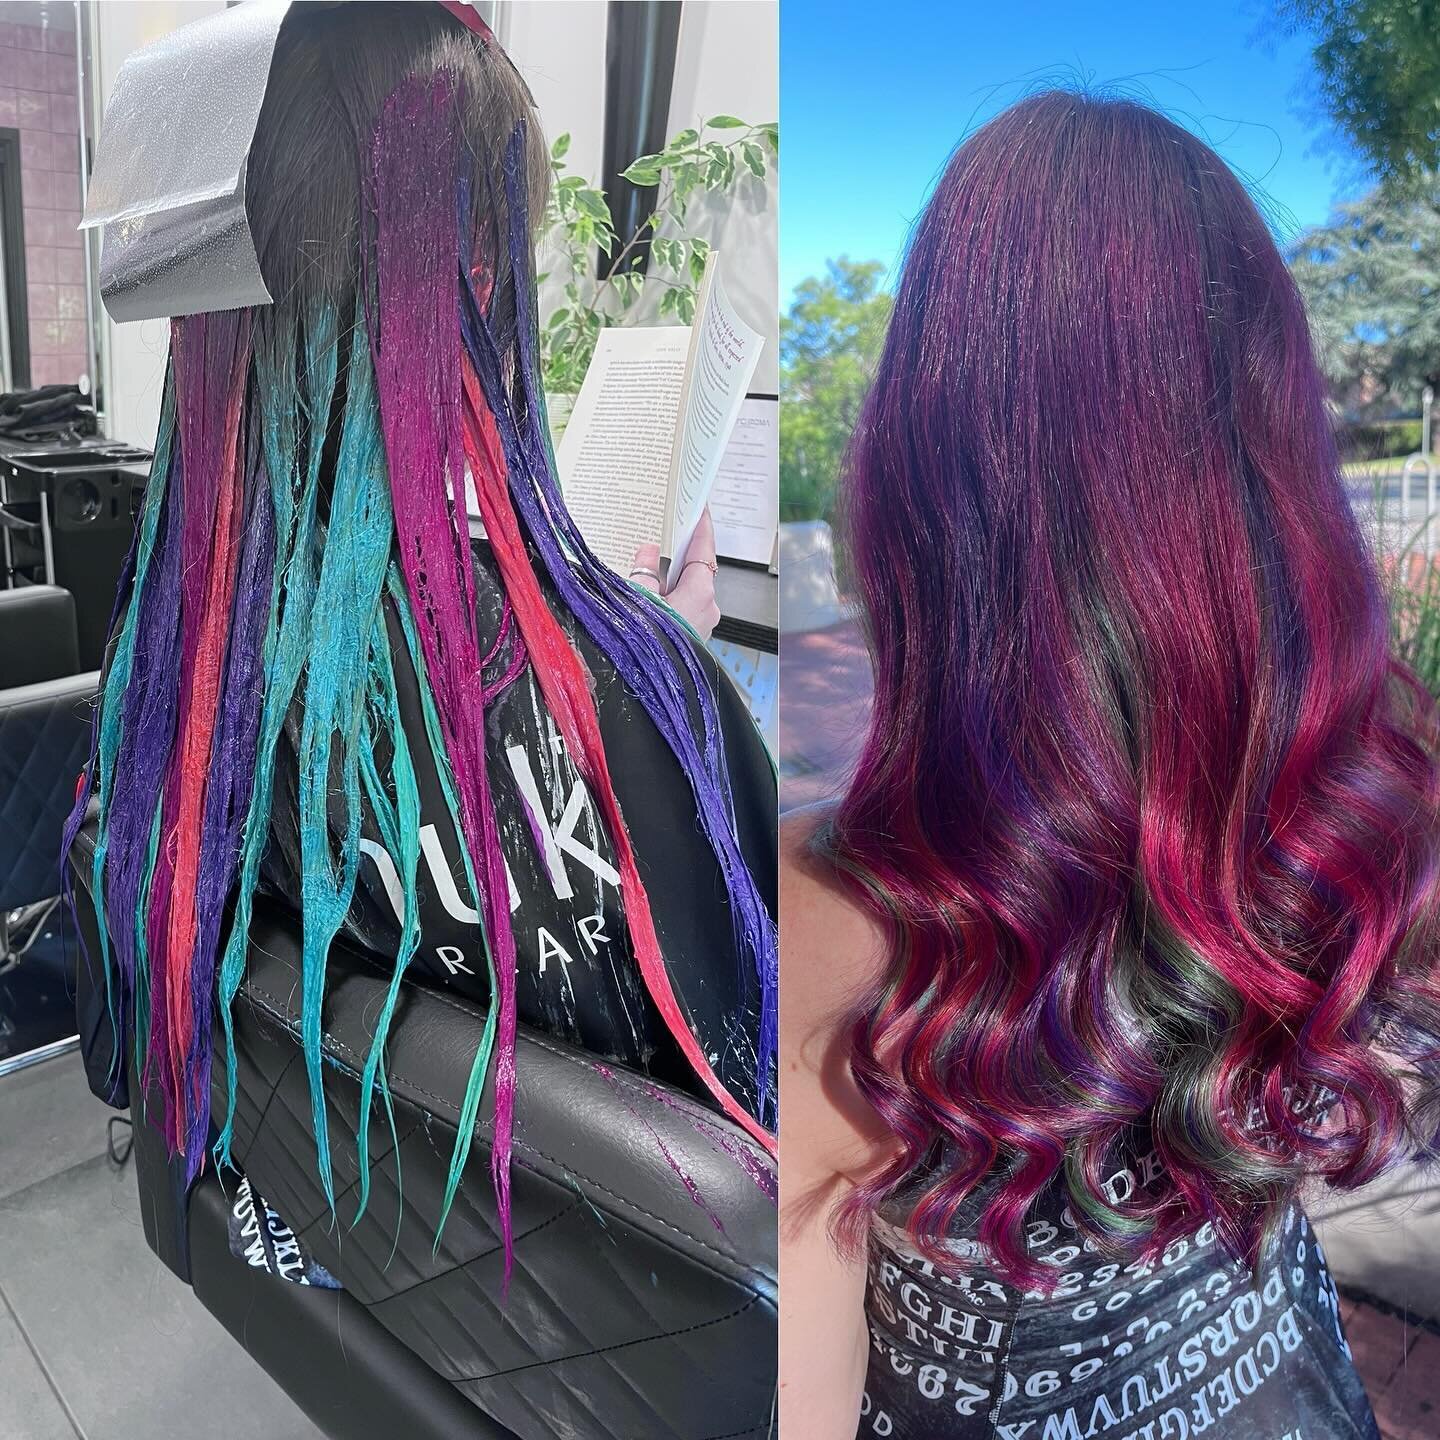 During and after stunning colour by @hairbyjessicaings 🩷❤️💛💚💙 using @evolvehairconcepts @pravana.australia @pravana 
#canberrahairdresser #canberrahairstylist #canberrahair #canberrahaircolourist #canberrahairsalon #pravana #pravanaaustralia #col